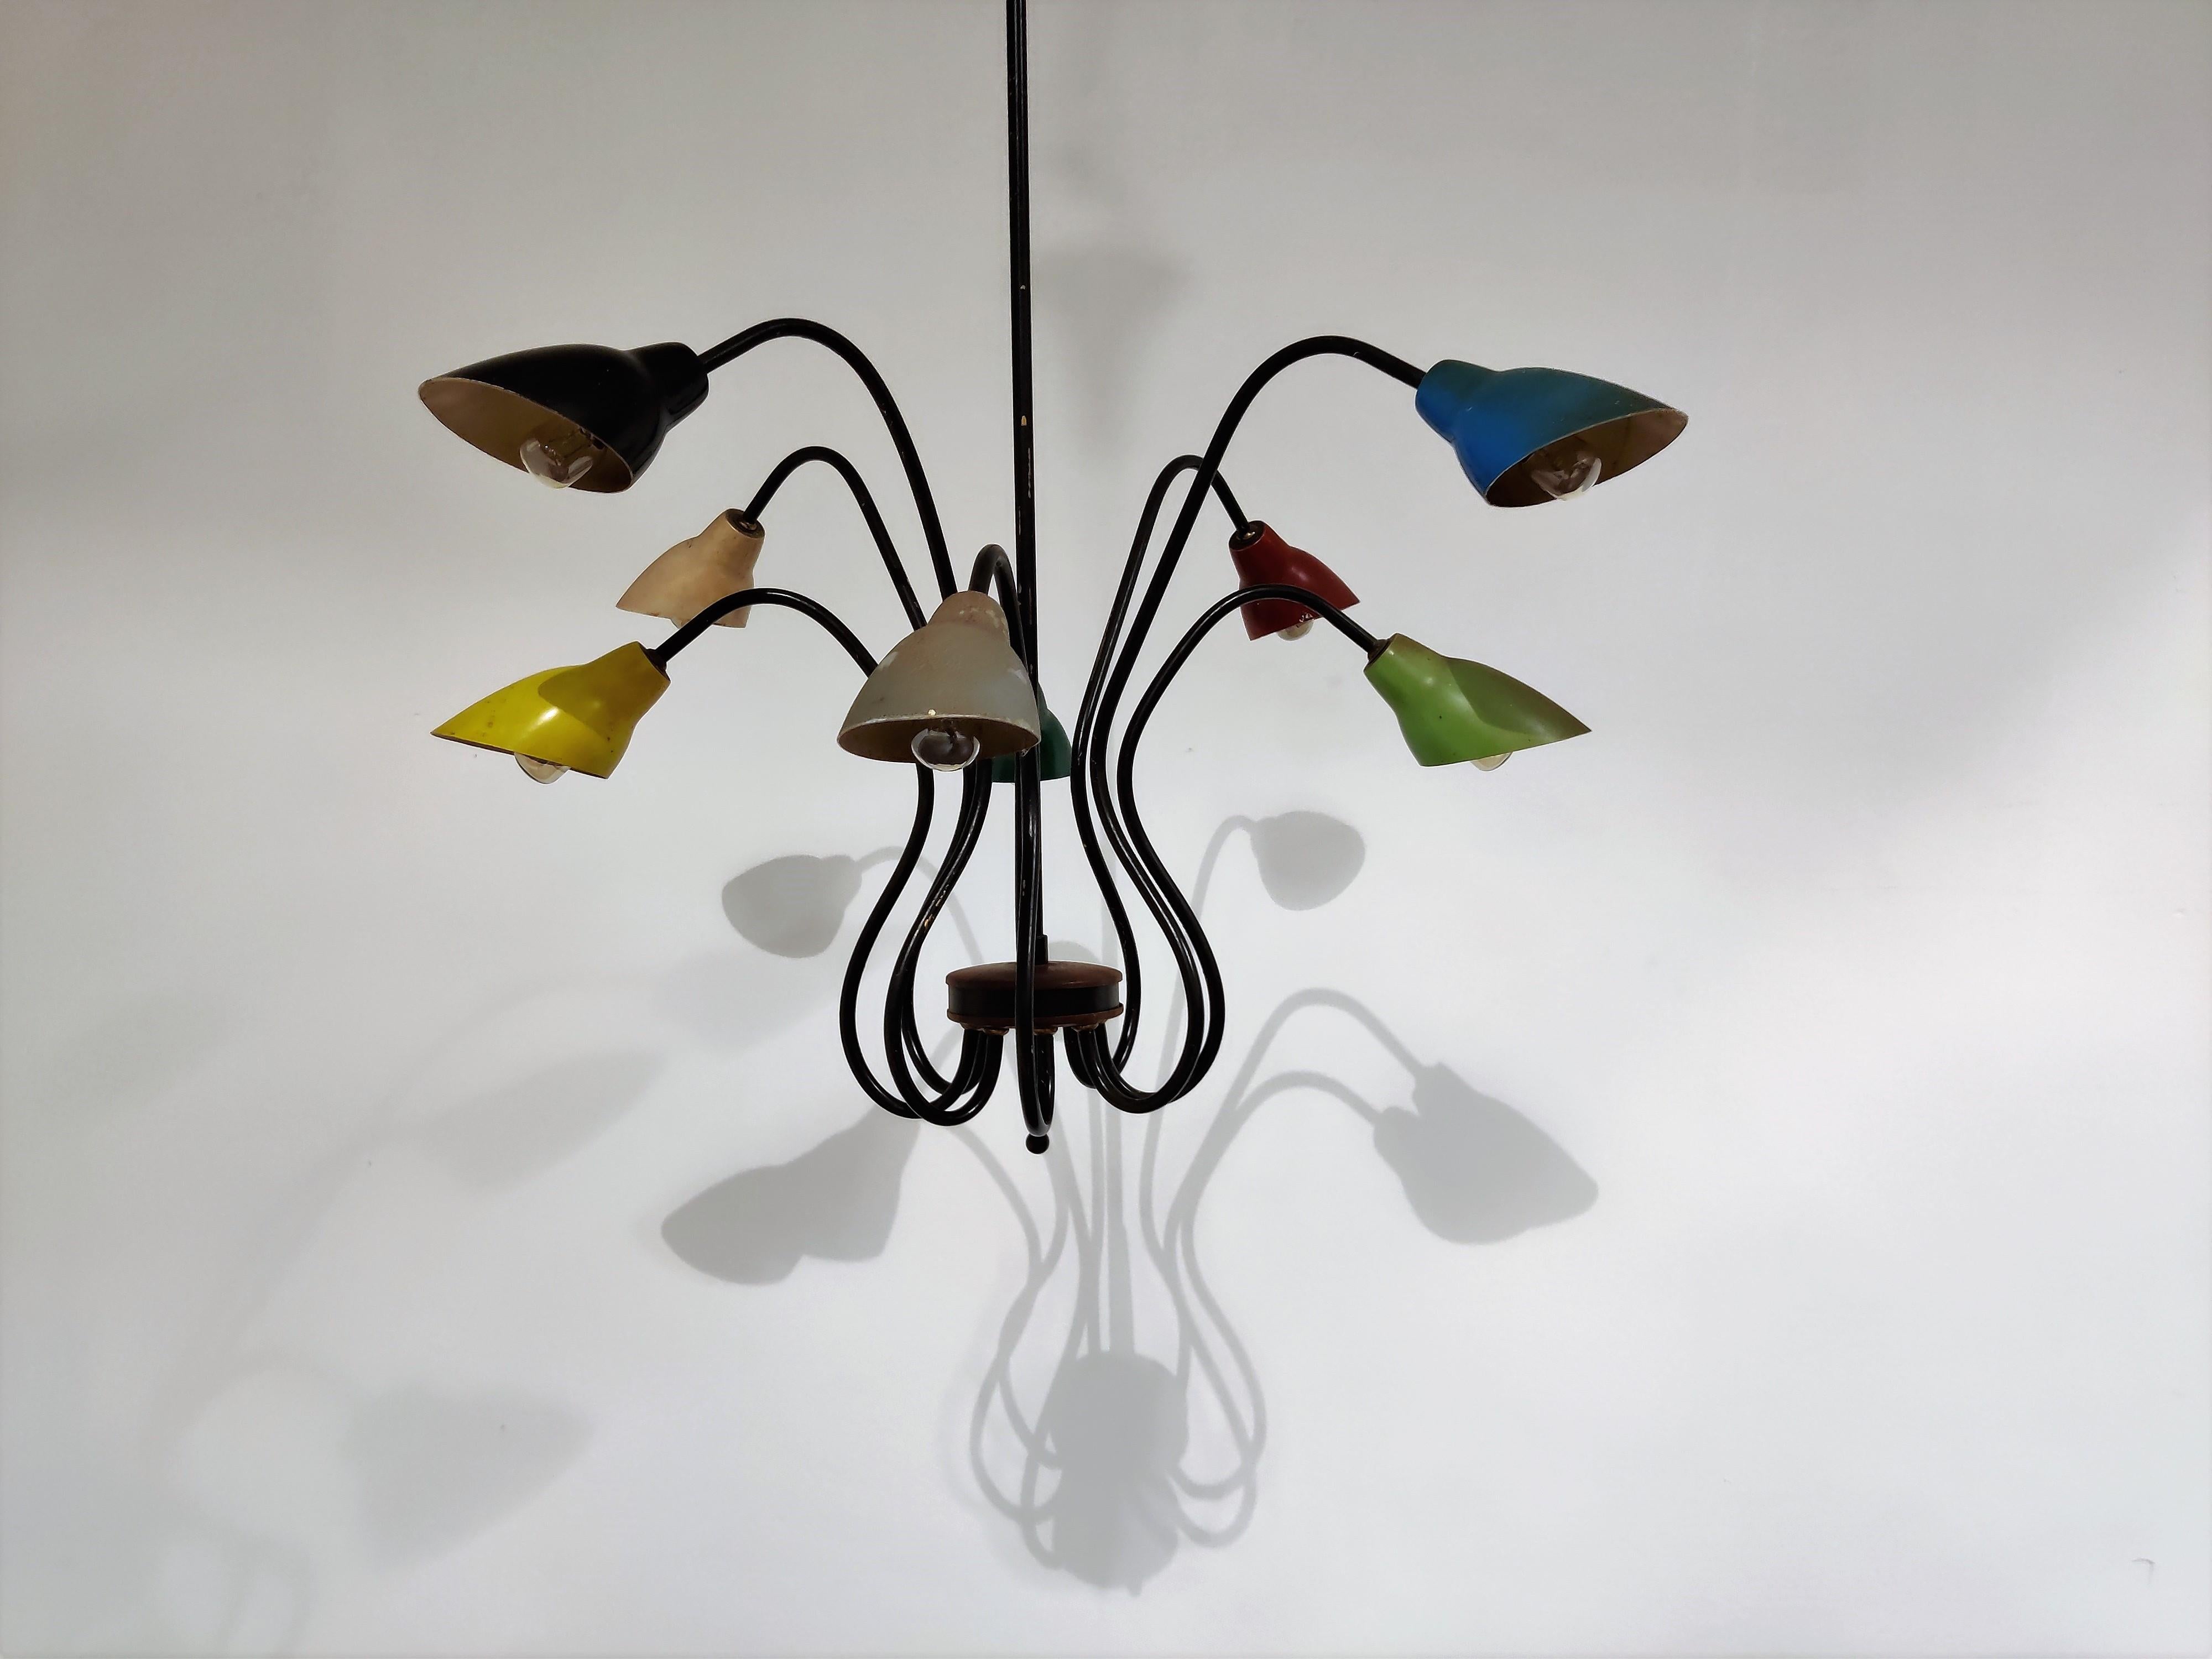 Beautiful midcentury 8-arm spider chandelier made from black lacquered brass and colored aluminum lamp shades.

This elegant chandelier is a rare find with the original untouched coloured lamp shades.

This type of lamps is mostly attributed to